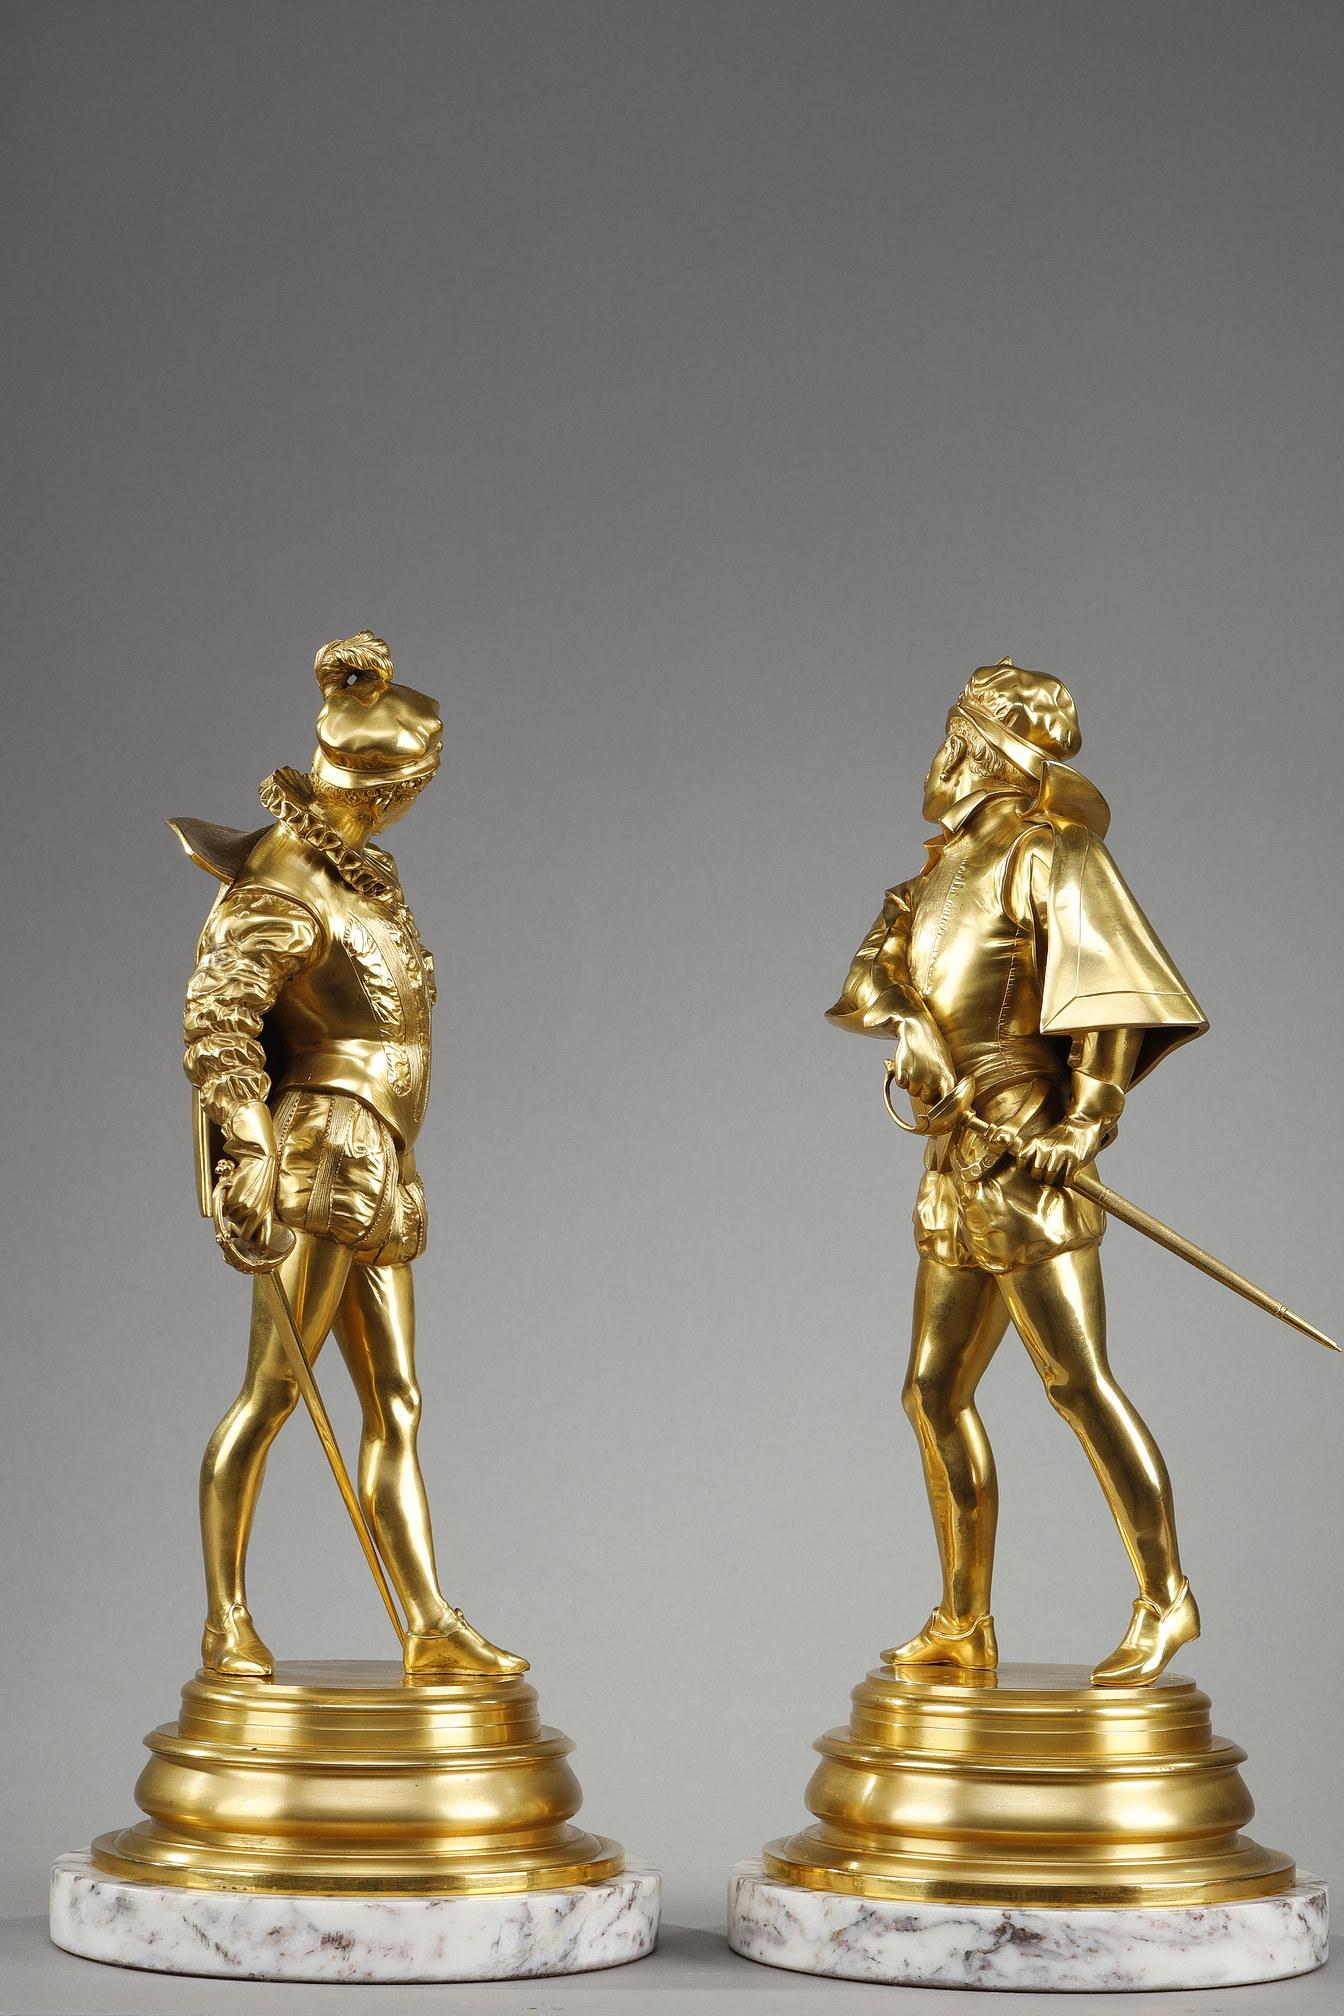 Two bronze proofs with golden patina by Auguste Louis Lalouette (1826-1883), depicting 